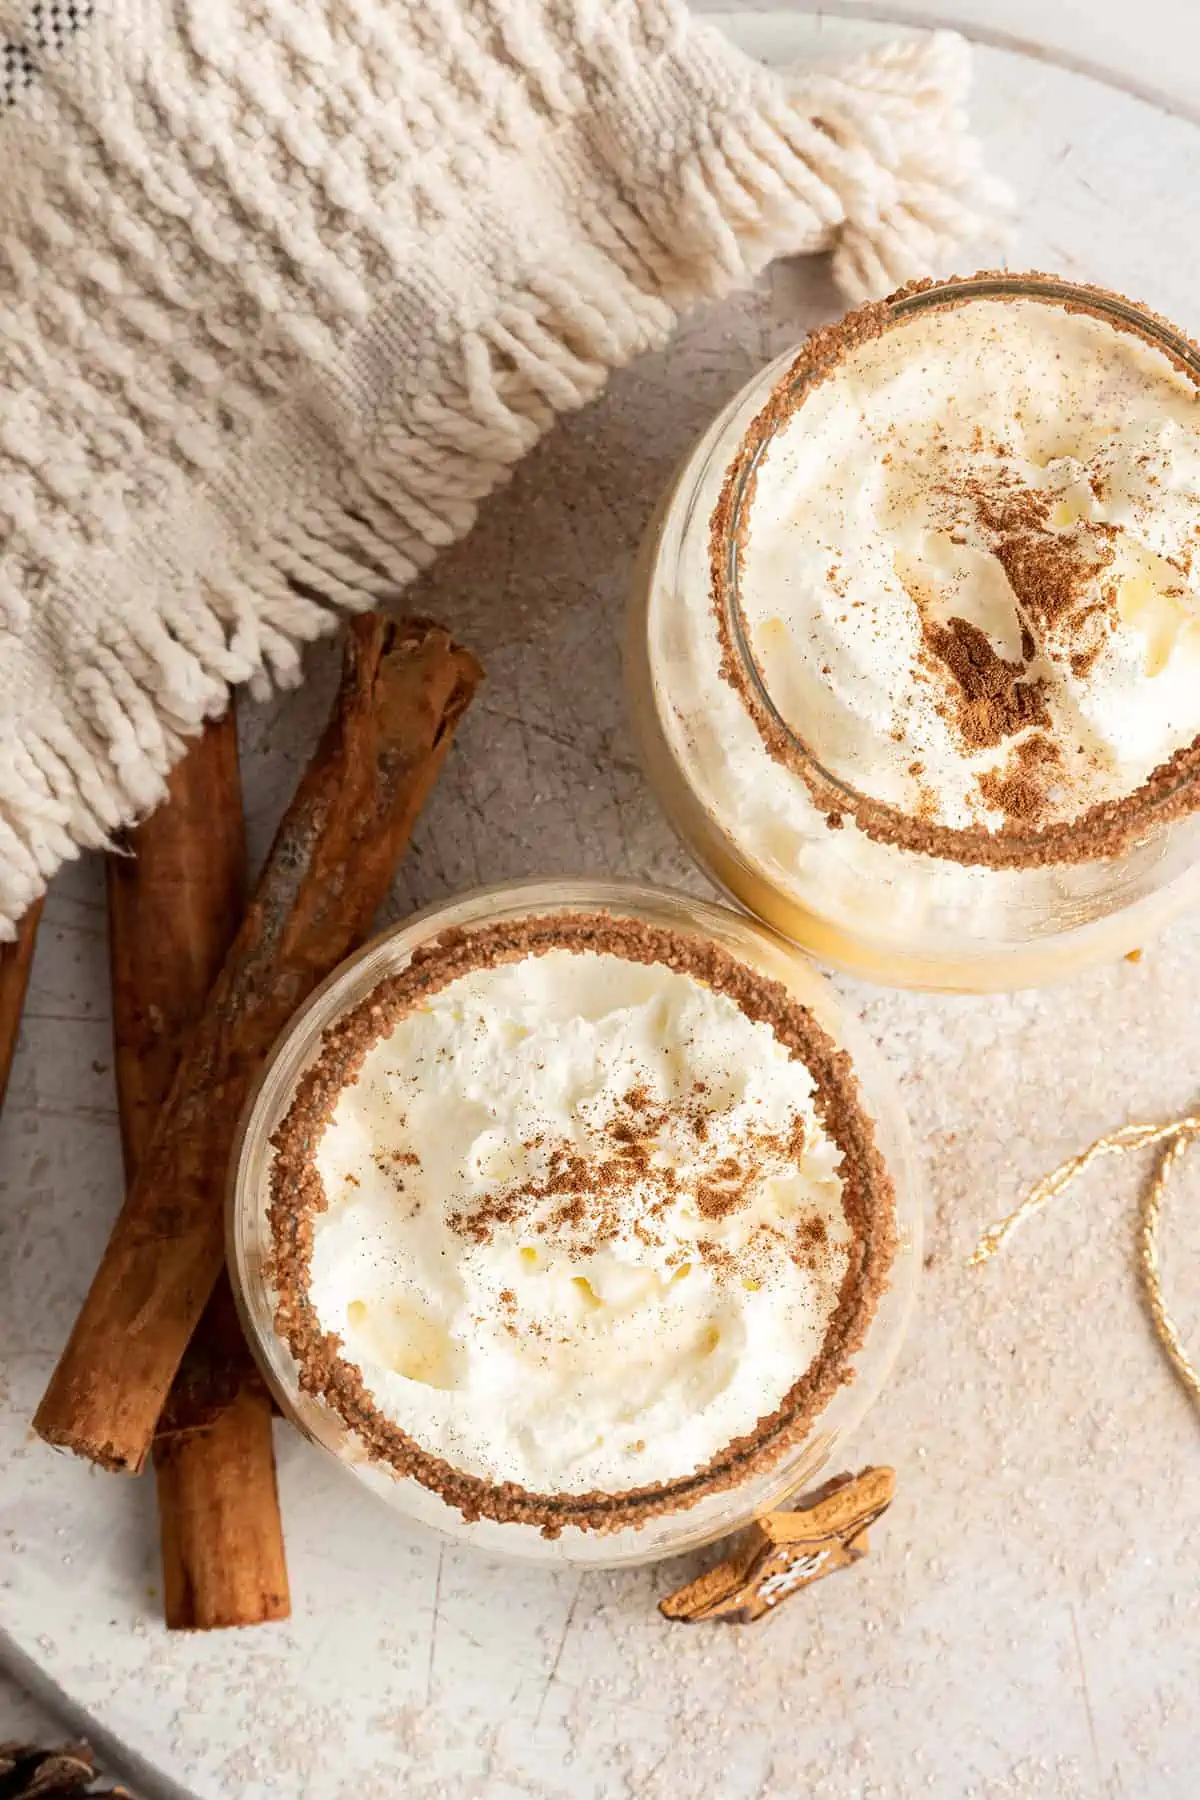 Overhead view of two glasses of Southern Comfort eggnog, topped with whipped cream and ground cinnamon, with a flavored rim, surrounded by cinnamon sticks